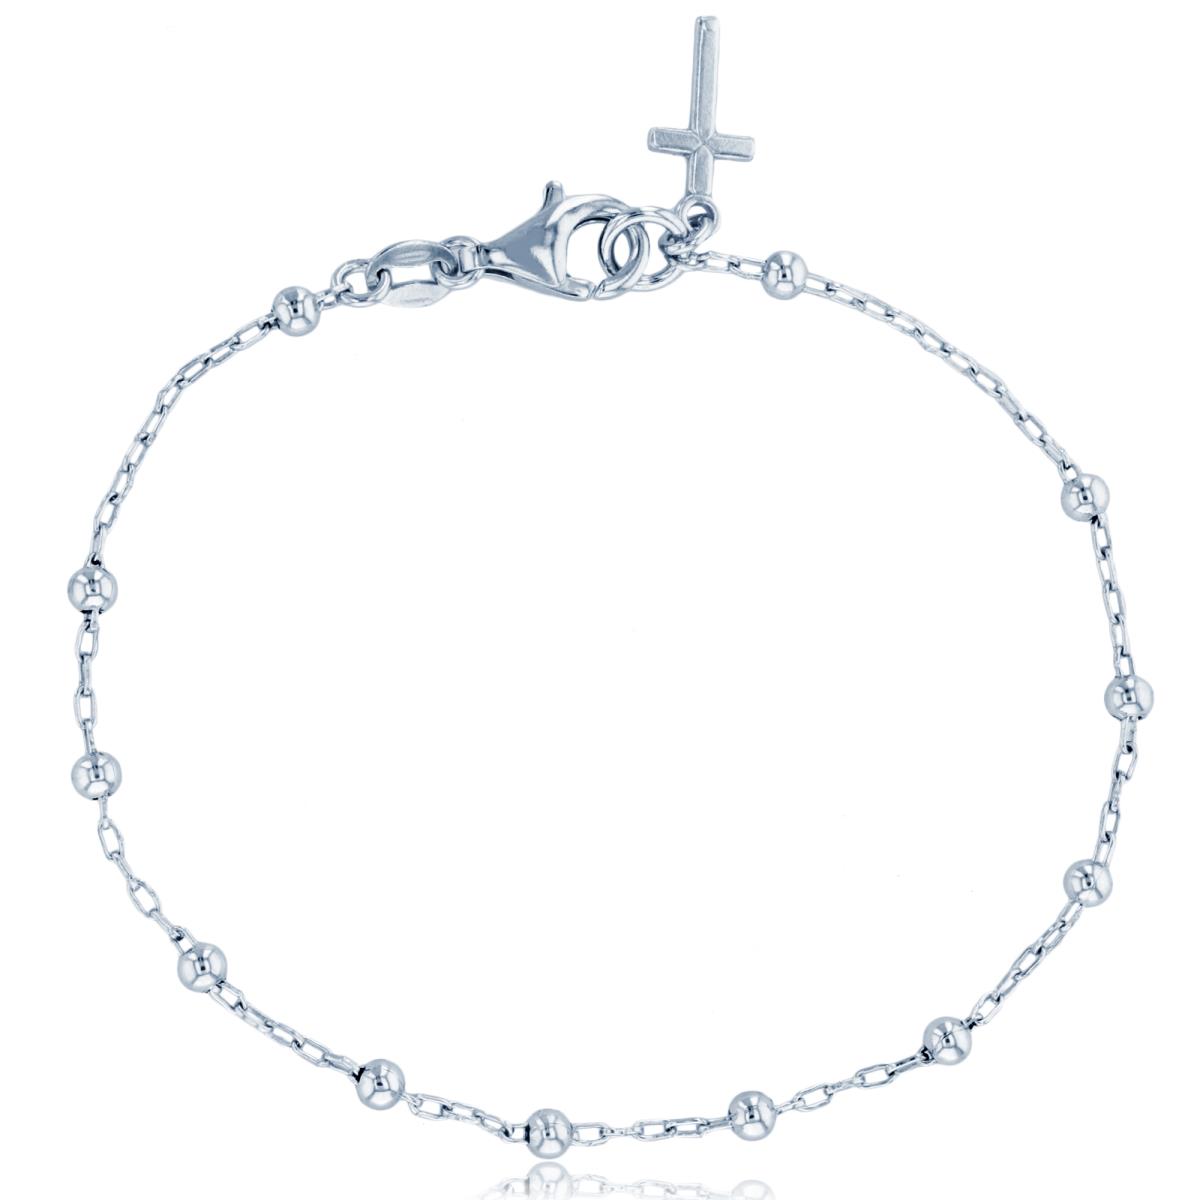 Sterling Silver Rhodium 3mm Beads 7.5" Bracelet with Dangling Cross